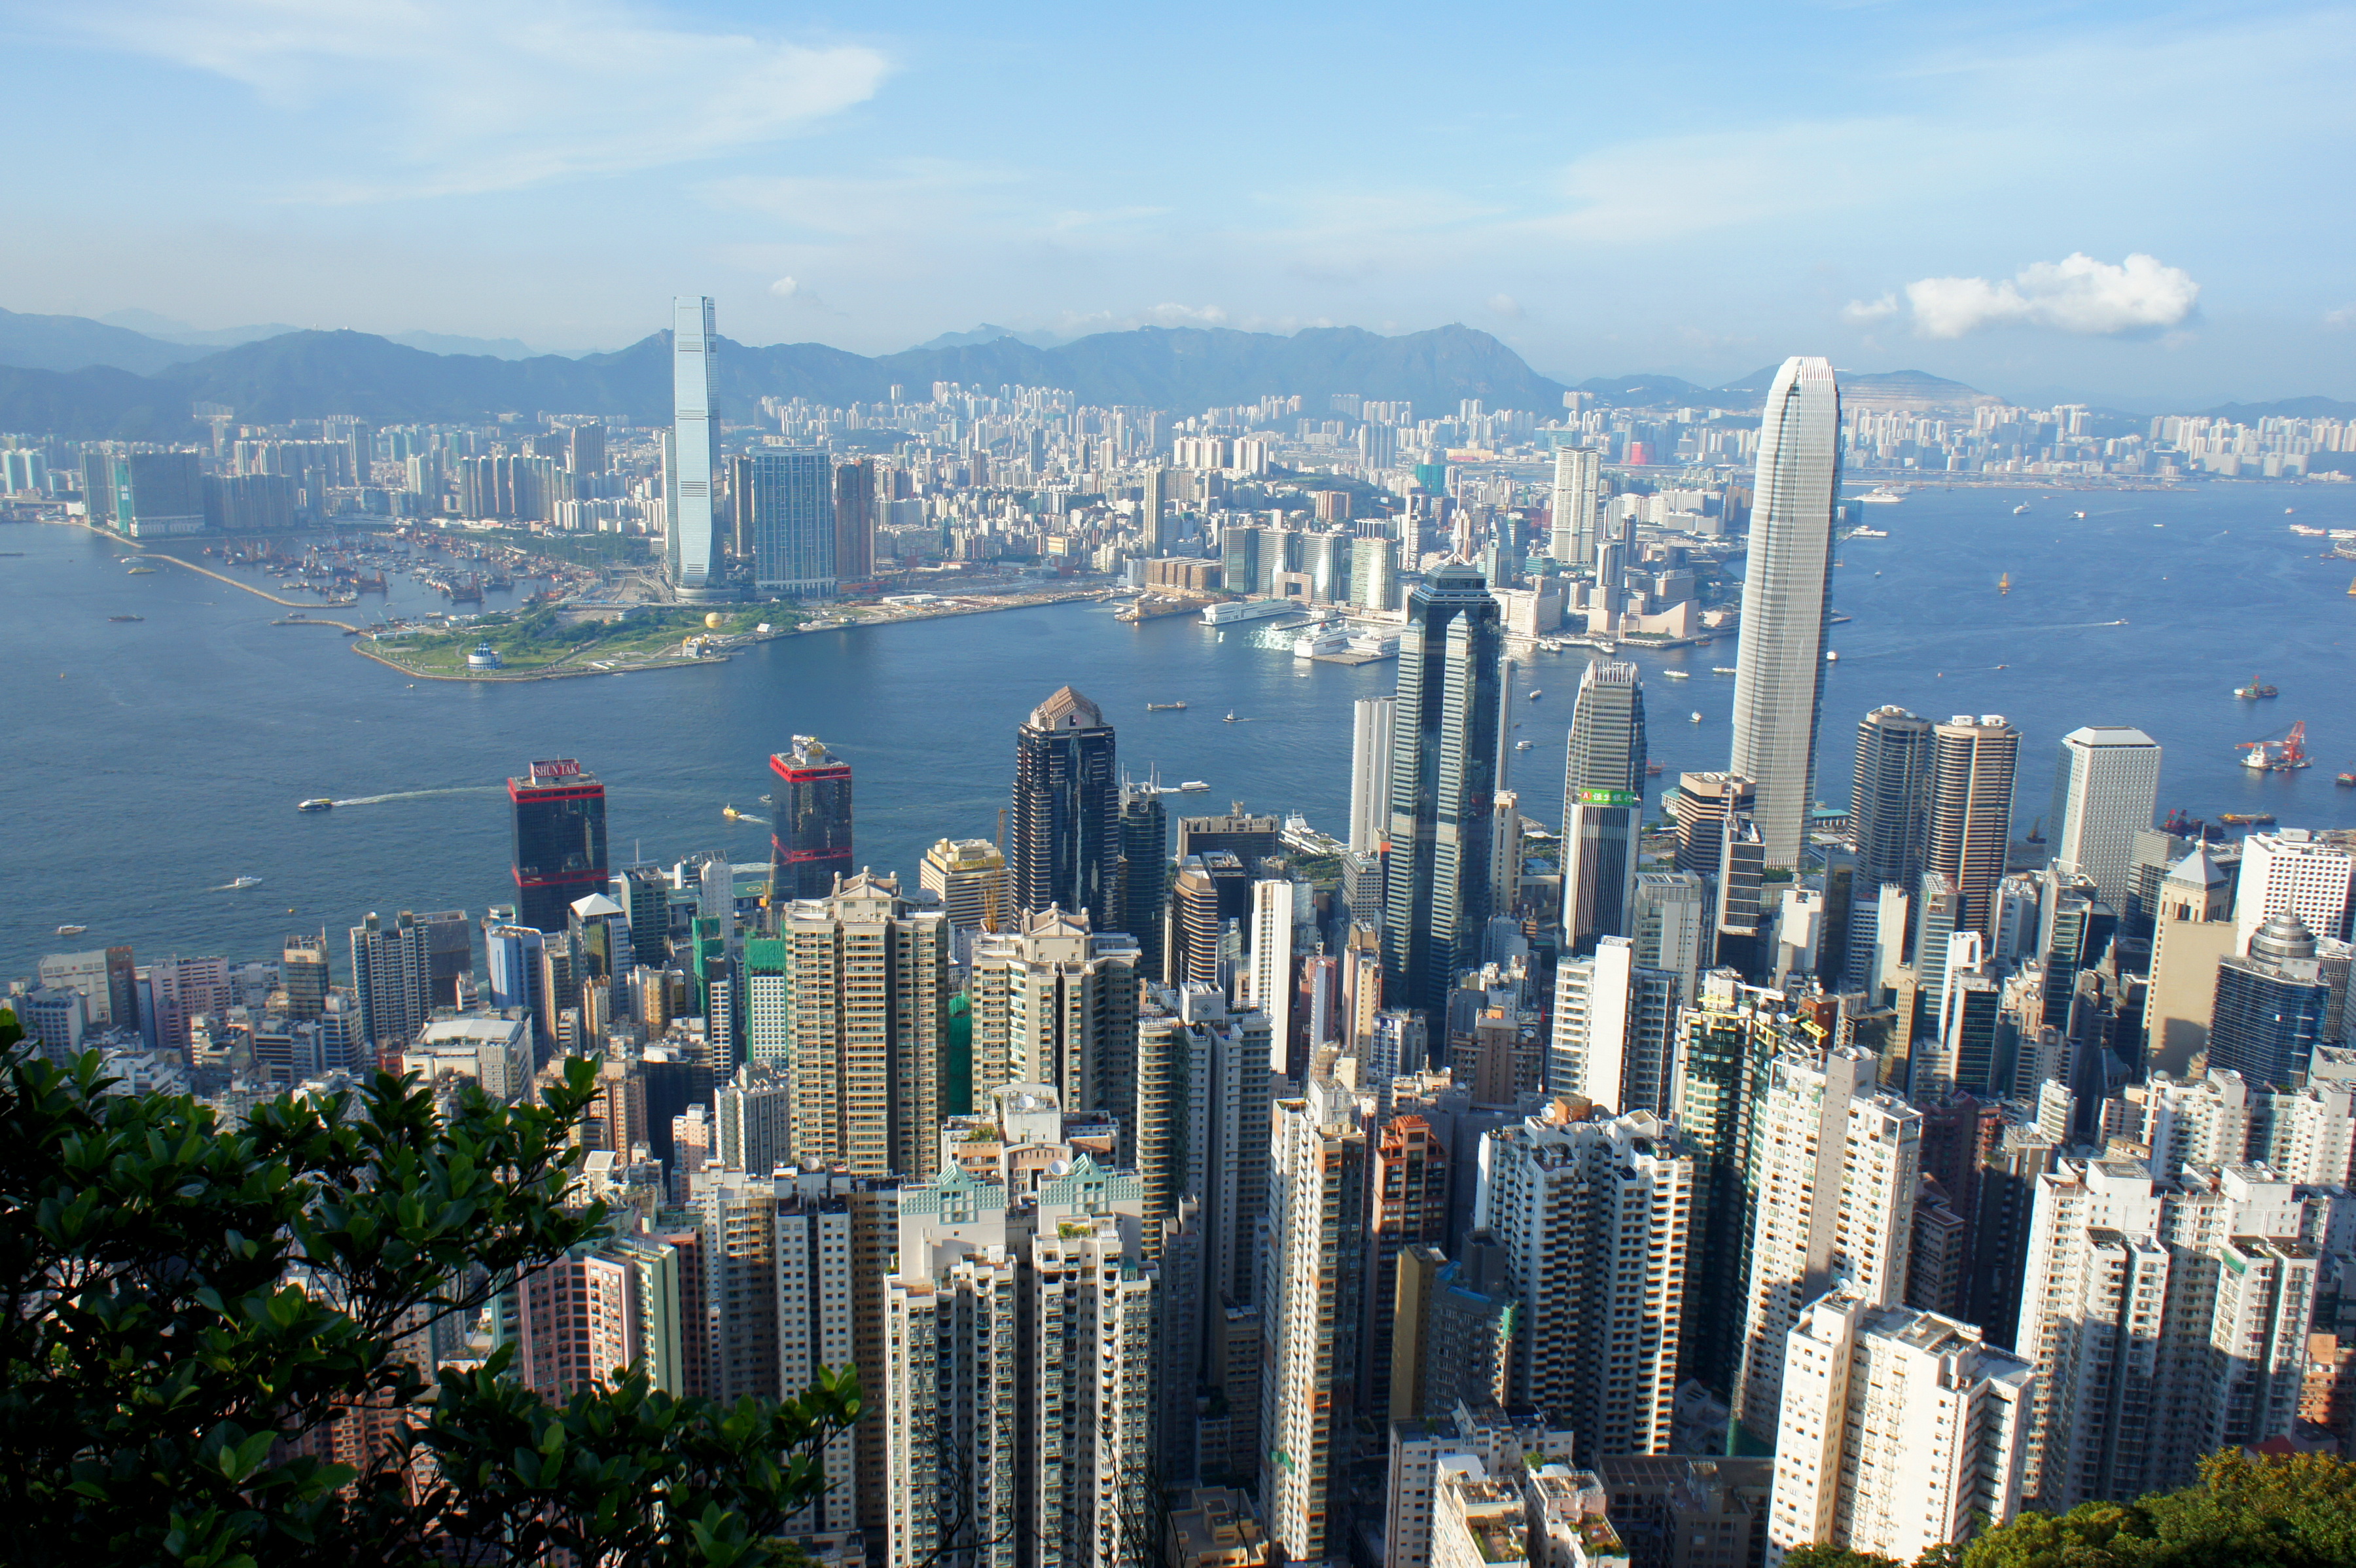 HONG KONG FROM ABOVE  > AN AMAZING & WONDERFUL SPECTACLE